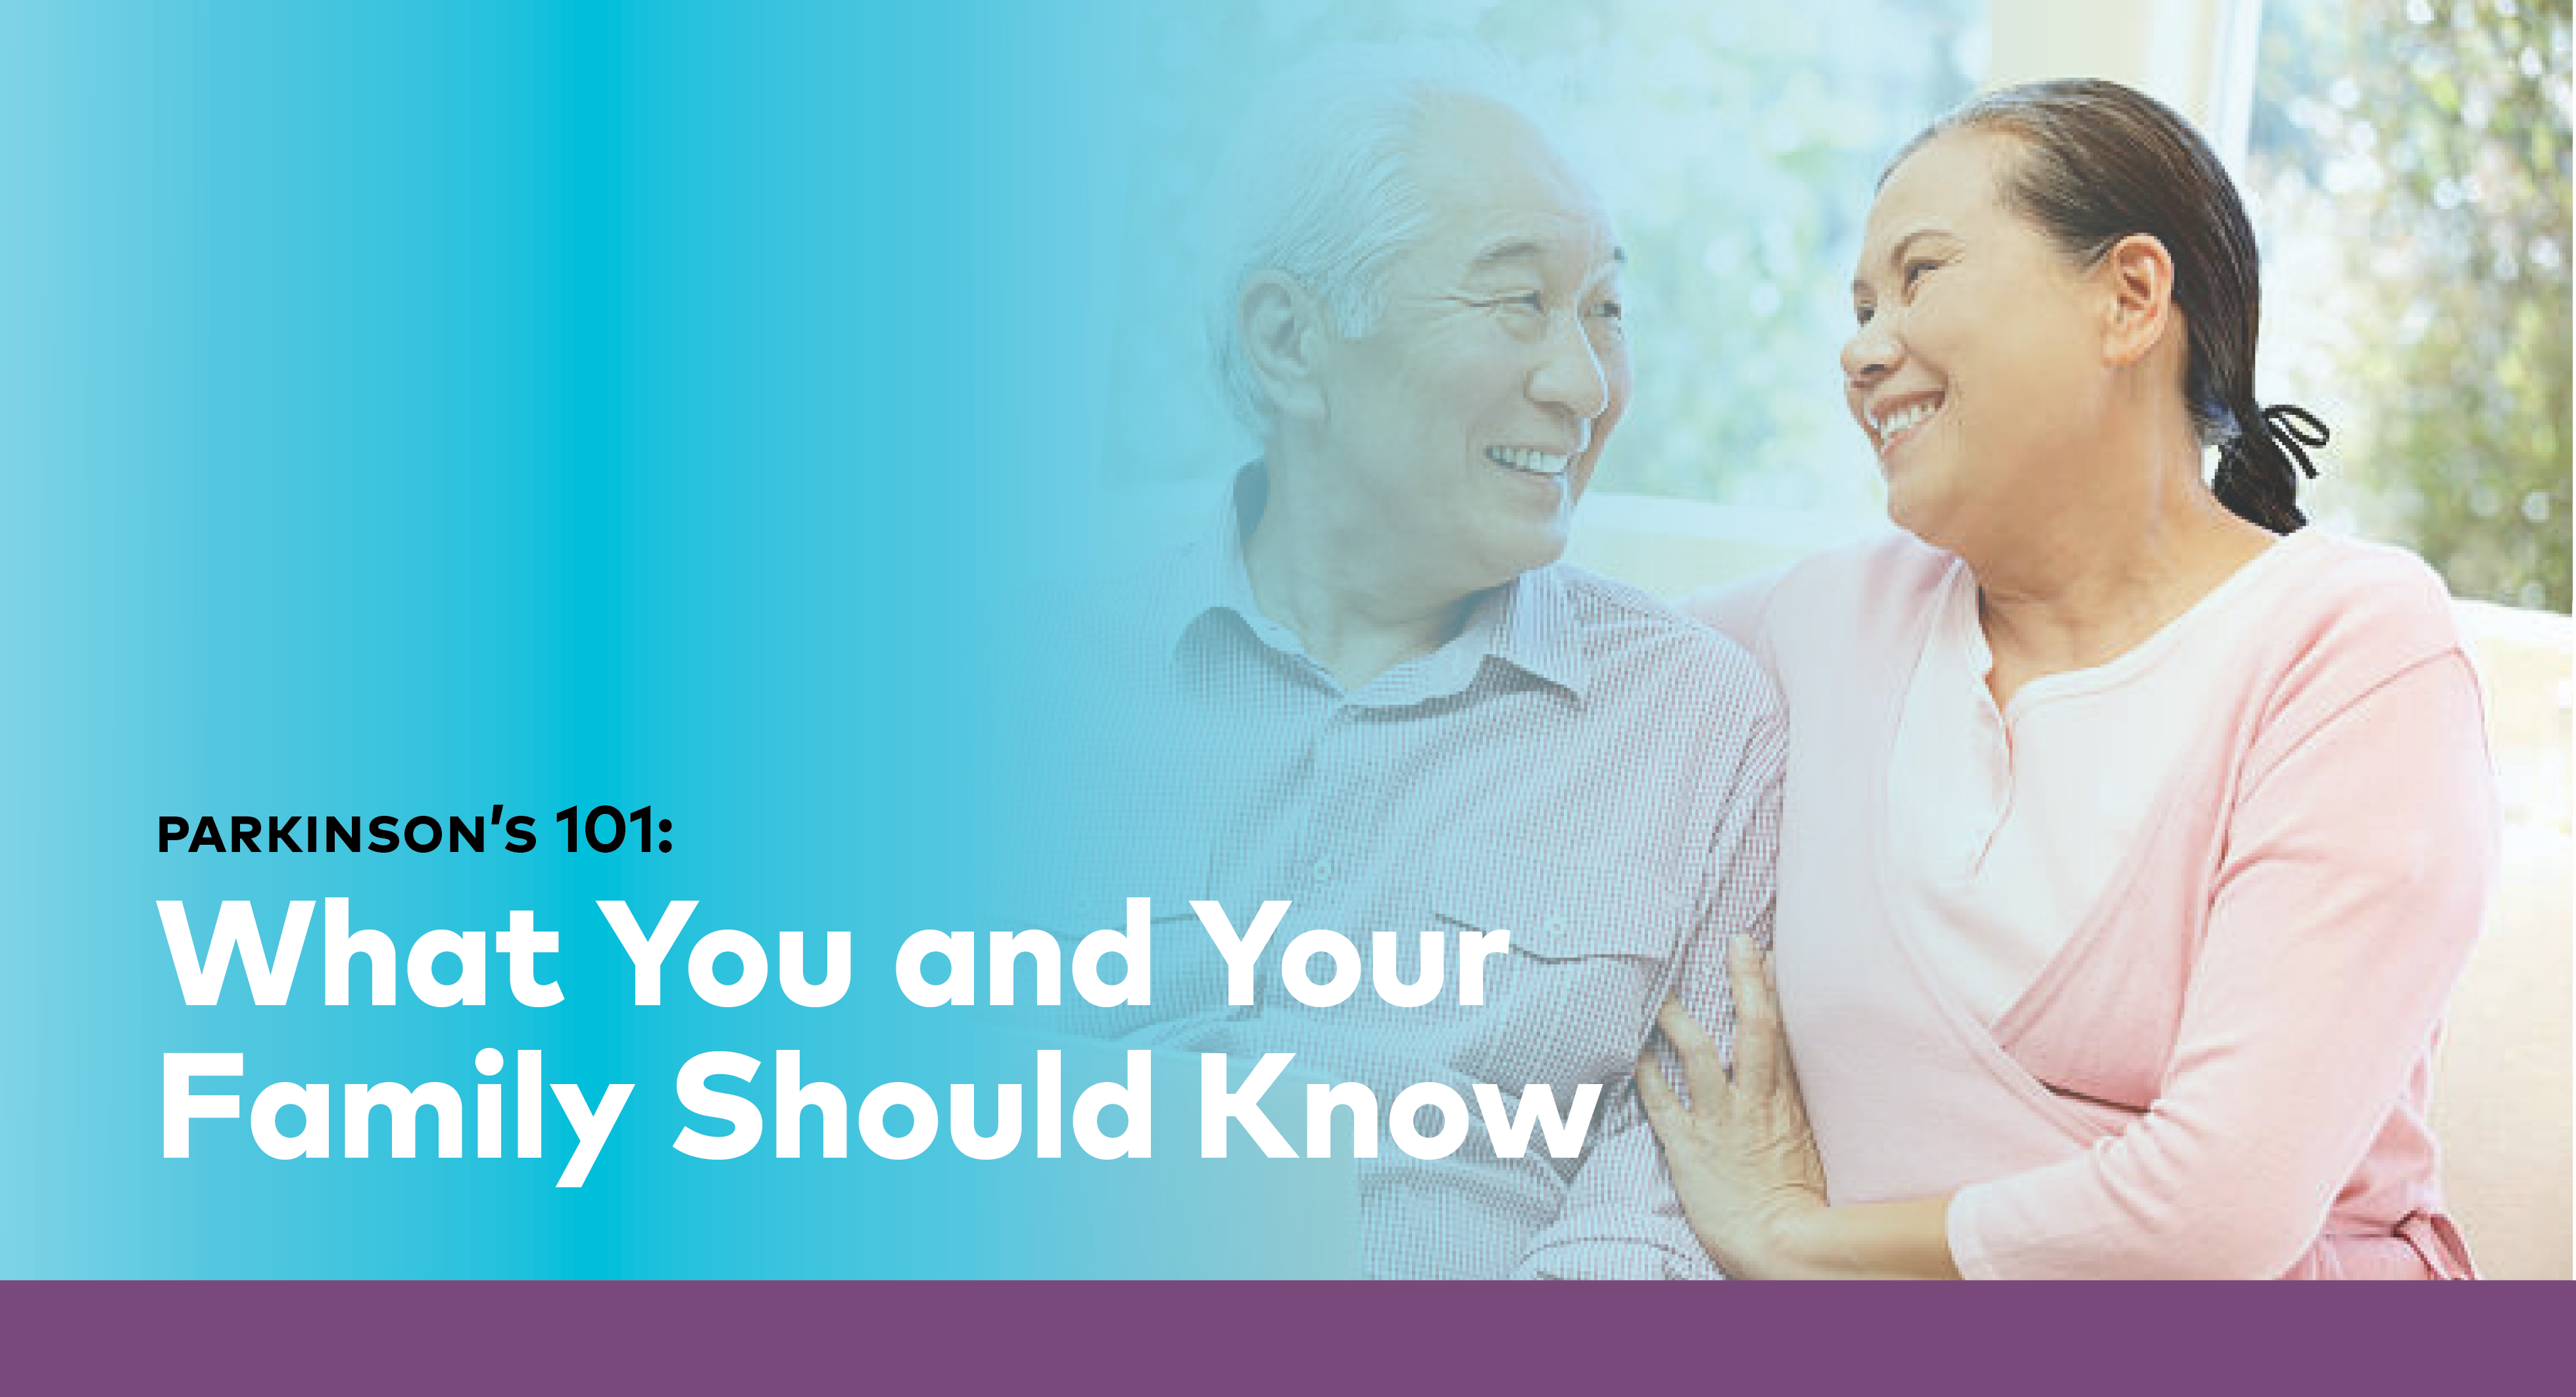 Parkinson's 101: What You and Your Family Should Know